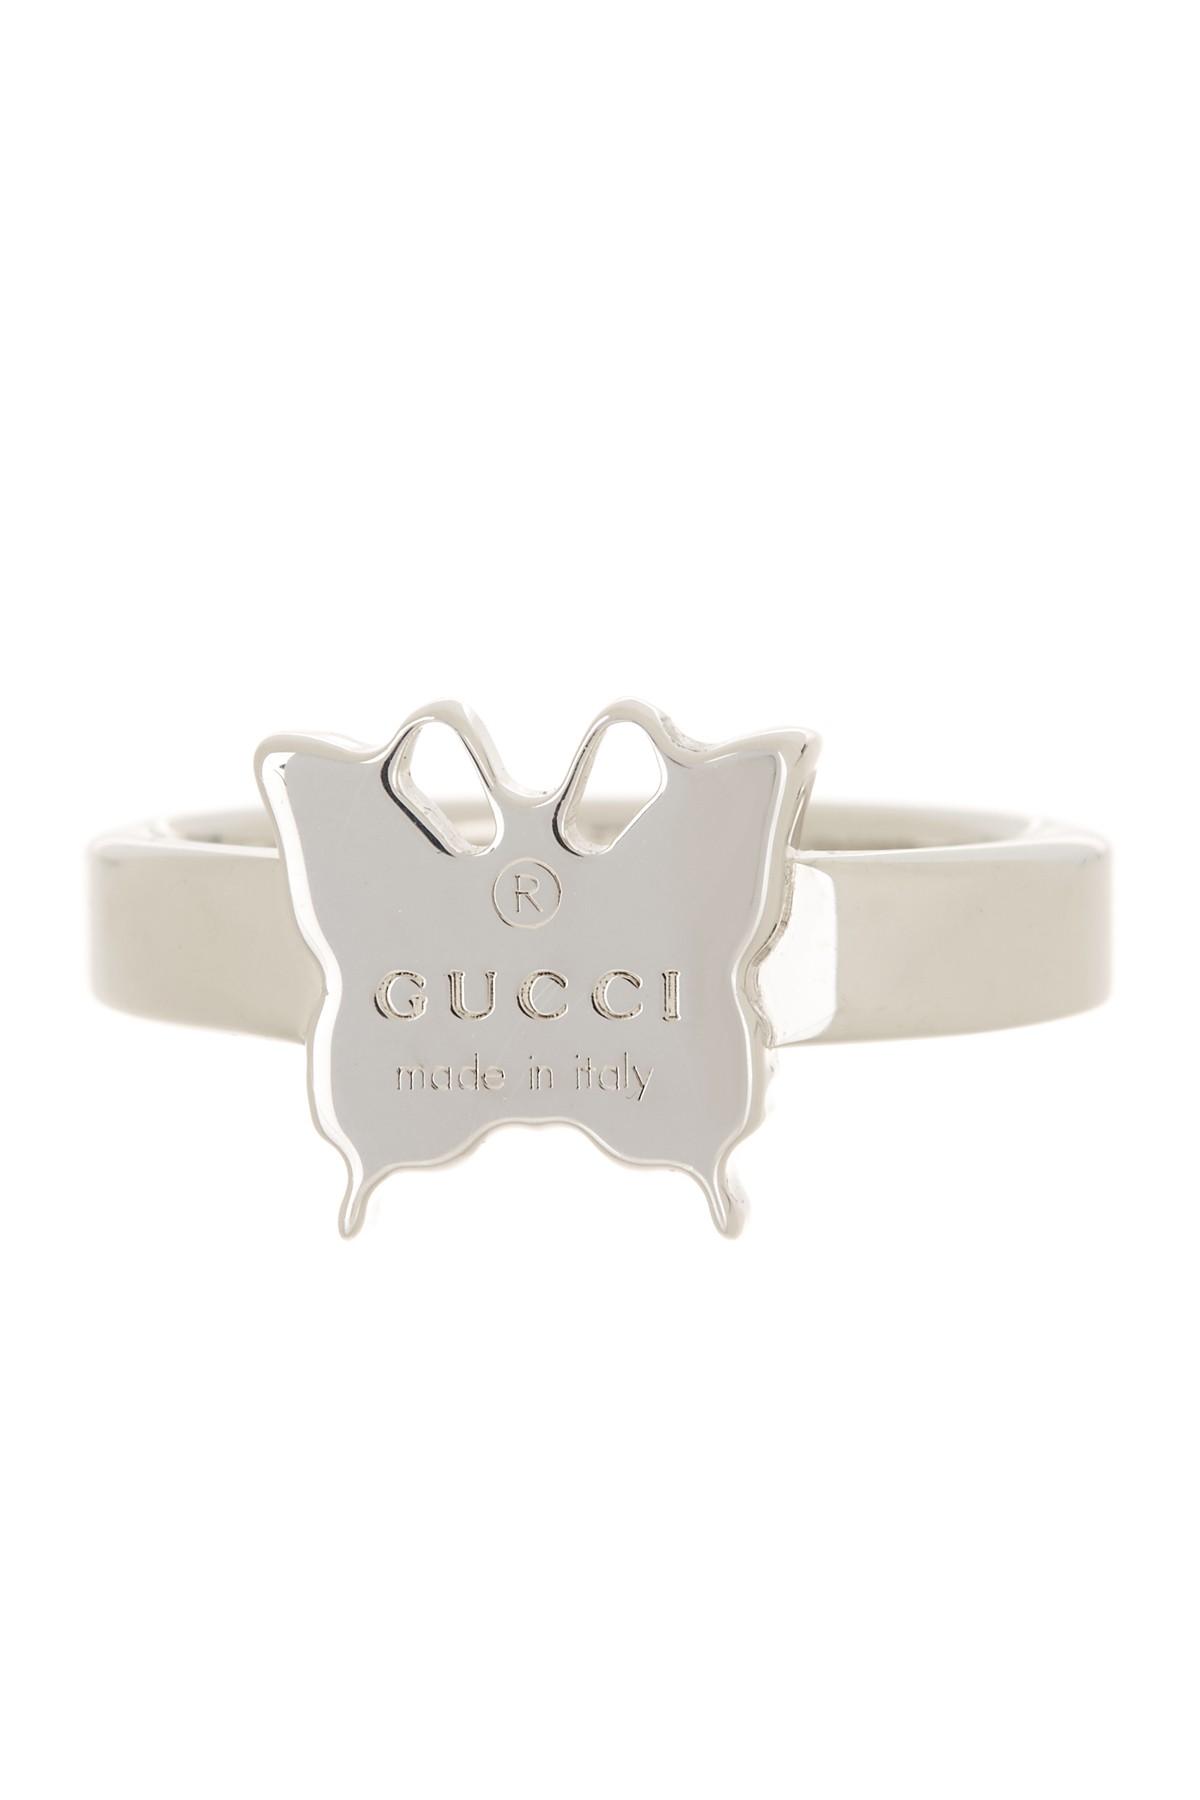 gucci butterfly ring silver